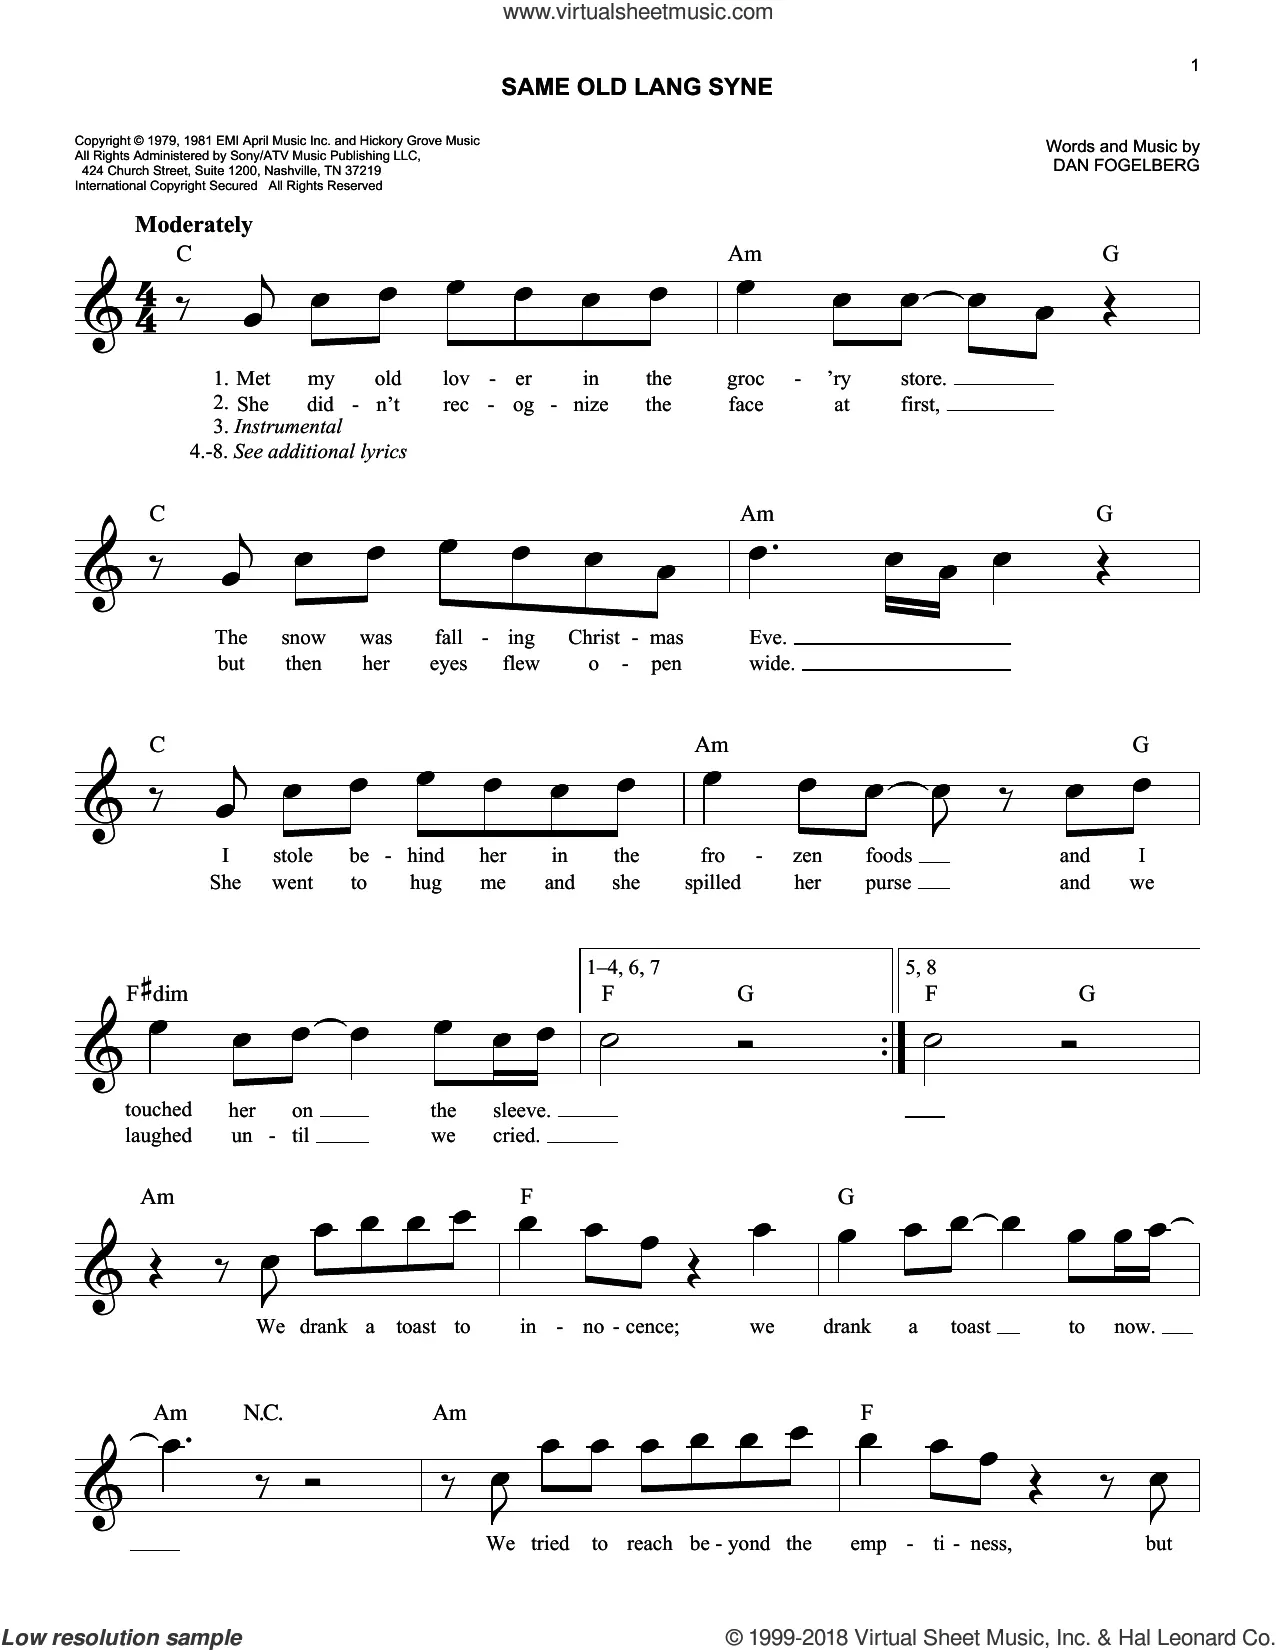 Auld Lang Syne - Tin Whistle Sheet Music and Tab with Chords and Lyrics